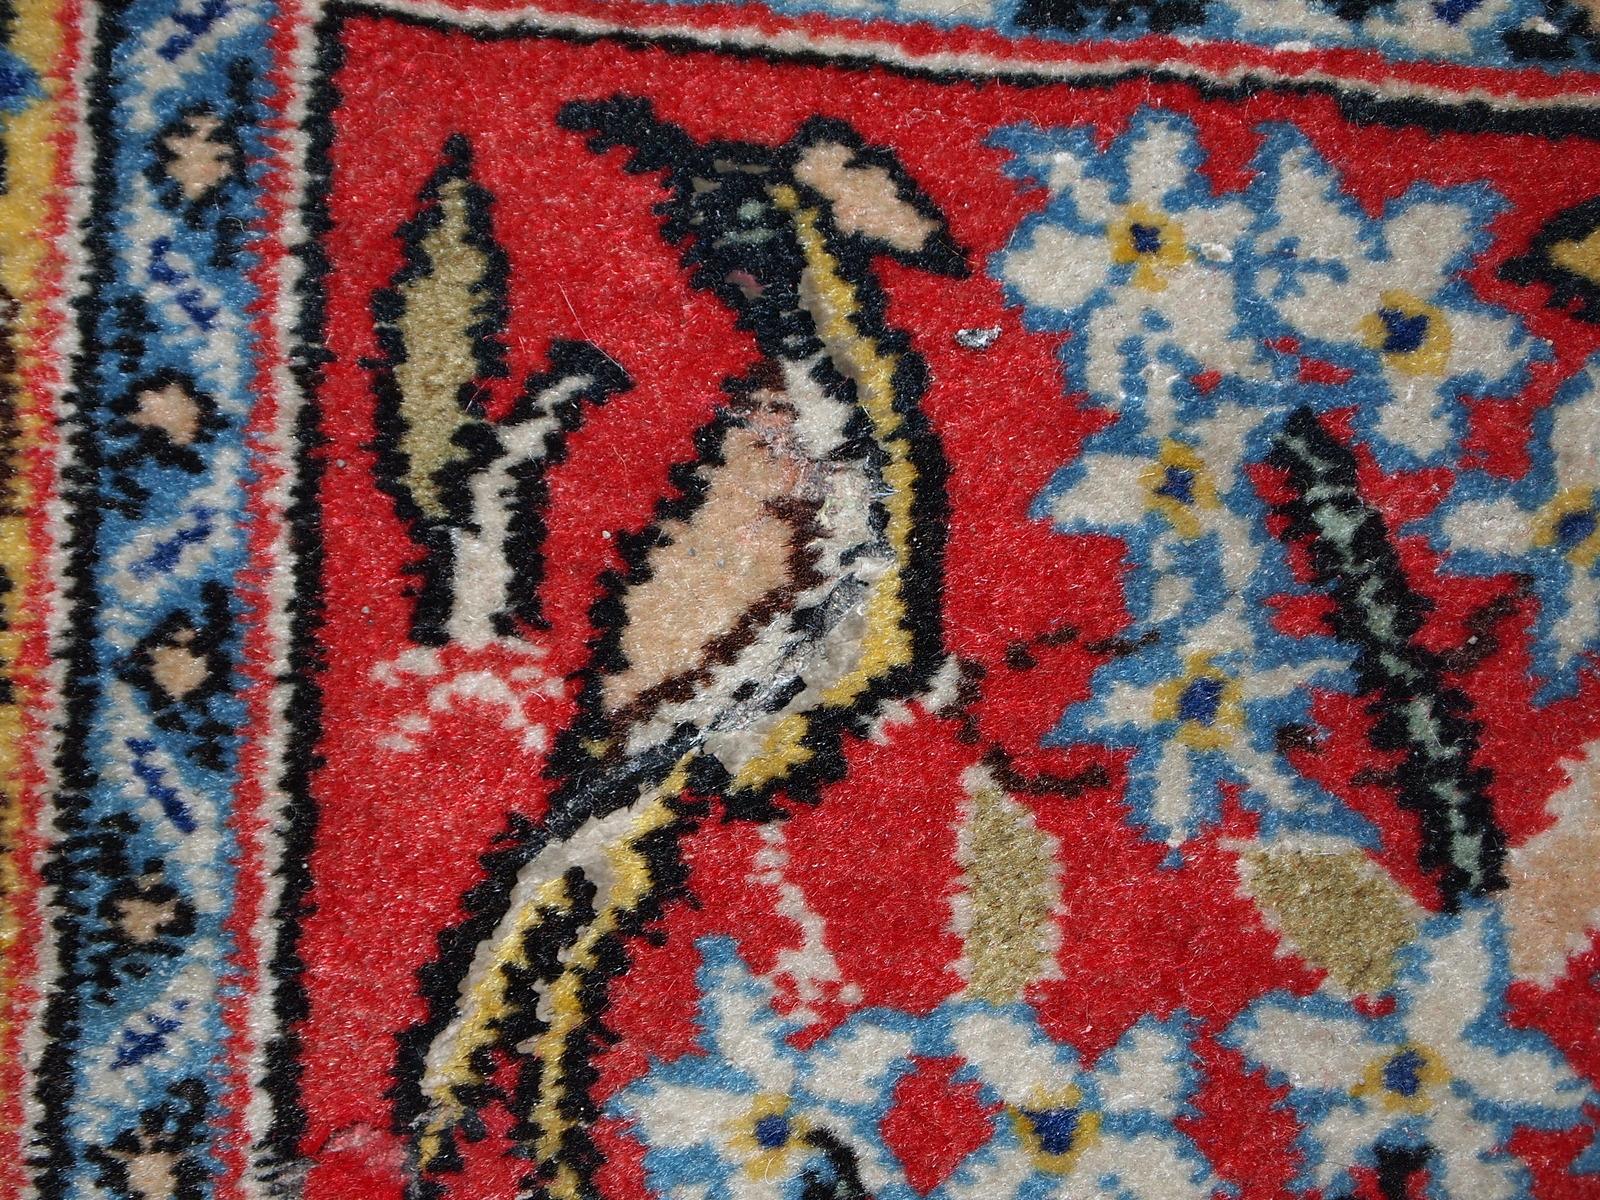 Vintage Tabriz style mat in original good condition. This rug made in red, sky blue and yellow wool. Measures: 1.5' x 1.7' (46cm x 54cm).